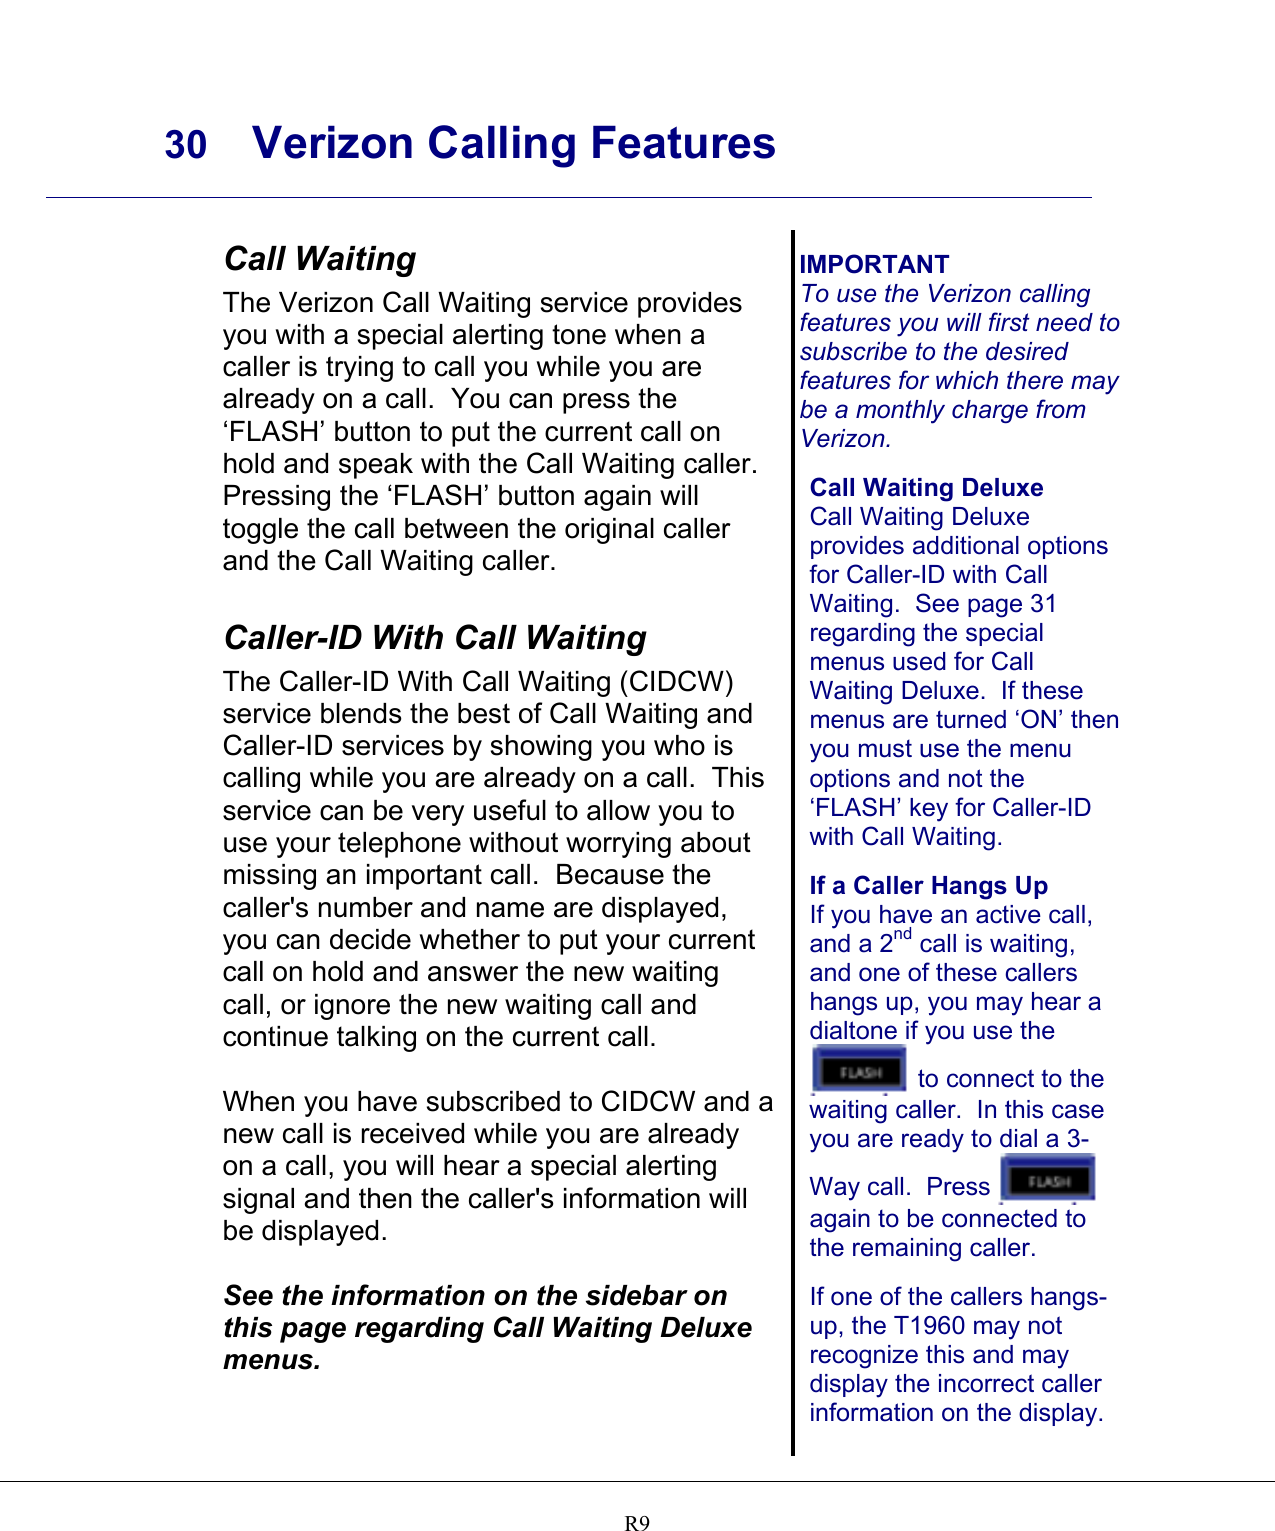     30 Verizon Calling Features    R9 Call Waiting The Verizon Call Waiting service provides you with a special alerting tone when a caller is trying to call you while you are already on a call.  You can press the ‘FLASH’ button to put the current call on hold and speak with the Call Waiting caller.  Pressing the ‘FLASH’ button again will toggle the call between the original caller and the Call Waiting caller.  Caller-ID With Call Waiting The Caller-ID With Call Waiting (CIDCW) service blends the best of Call Waiting and Caller-ID services by showing you who is calling while you are already on a call.  This service can be very useful to allow you to use your telephone without worrying about missing an important call.  Because the caller&apos;s number and name are displayed, you can decide whether to put your current call on hold and answer the new waiting call, or ignore the new waiting call and continue talking on the current call.  When you have subscribed to CIDCW and a new call is received while you are already on a call, you will hear a special alerting signal and then the caller&apos;s information will be displayed.  See the information on the sidebar on this page regarding Call Waiting Deluxe menus.    IMPORTANT To use the Verizon calling features you will first need to subscribe to the desired features for which there may be a monthly charge from Verizon.  Call Waiting Deluxe Call Waiting Deluxe provides additional options for Caller-ID with Call Waiting.  See page 31 regarding the special menus used for Call Waiting Deluxe.  If these menus are turned ‘ON’ then you must use the menu options and not the ‘FLASH’ key for Caller-ID with Call Waiting.  If a Caller Hangs Up If you have an active call, and a 2nd call is waiting, and one of these callers hangs up, you may hear a dialtone if you use the  to connect to the waiting caller.  In this case you are ready to dial a 3-Way call.  Press   again to be connected to the remaining caller.  If one of the callers hangs-up, the T1960 may not recognize this and may display the incorrect caller information on the display.  